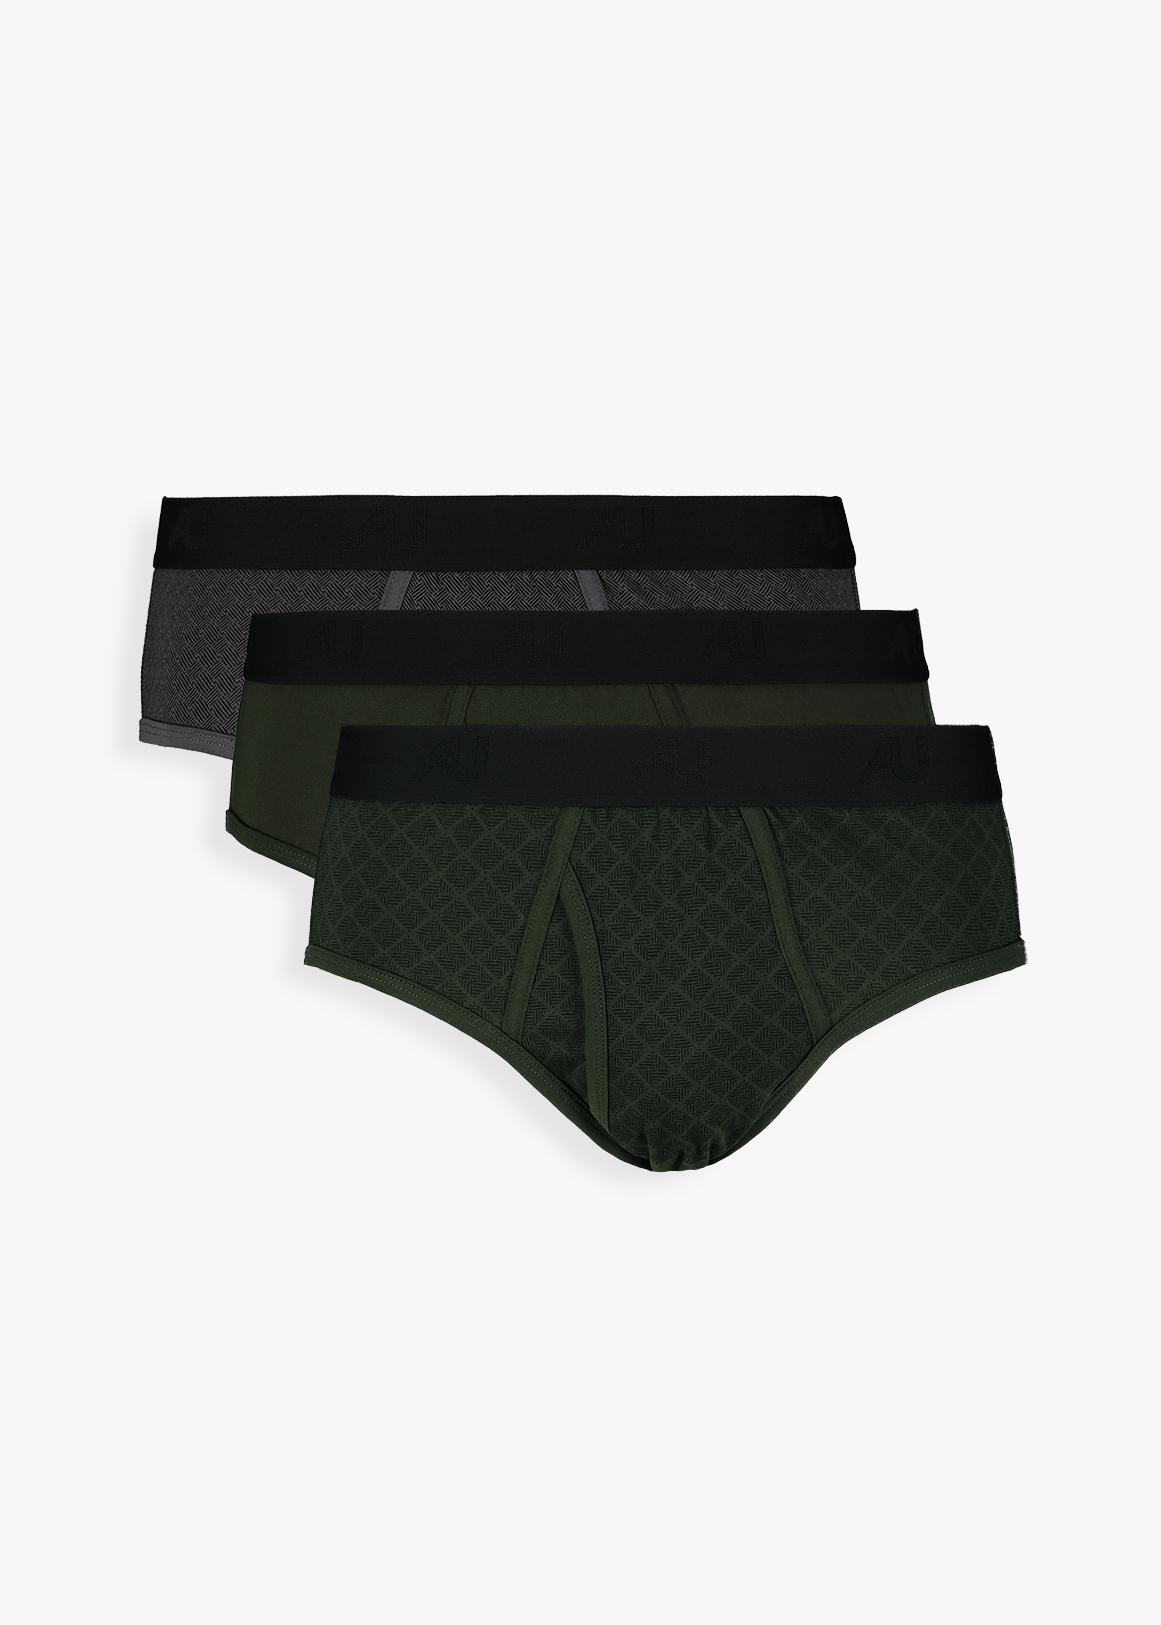 StayNew COOLTECH Cotton Briefs 3 Pack